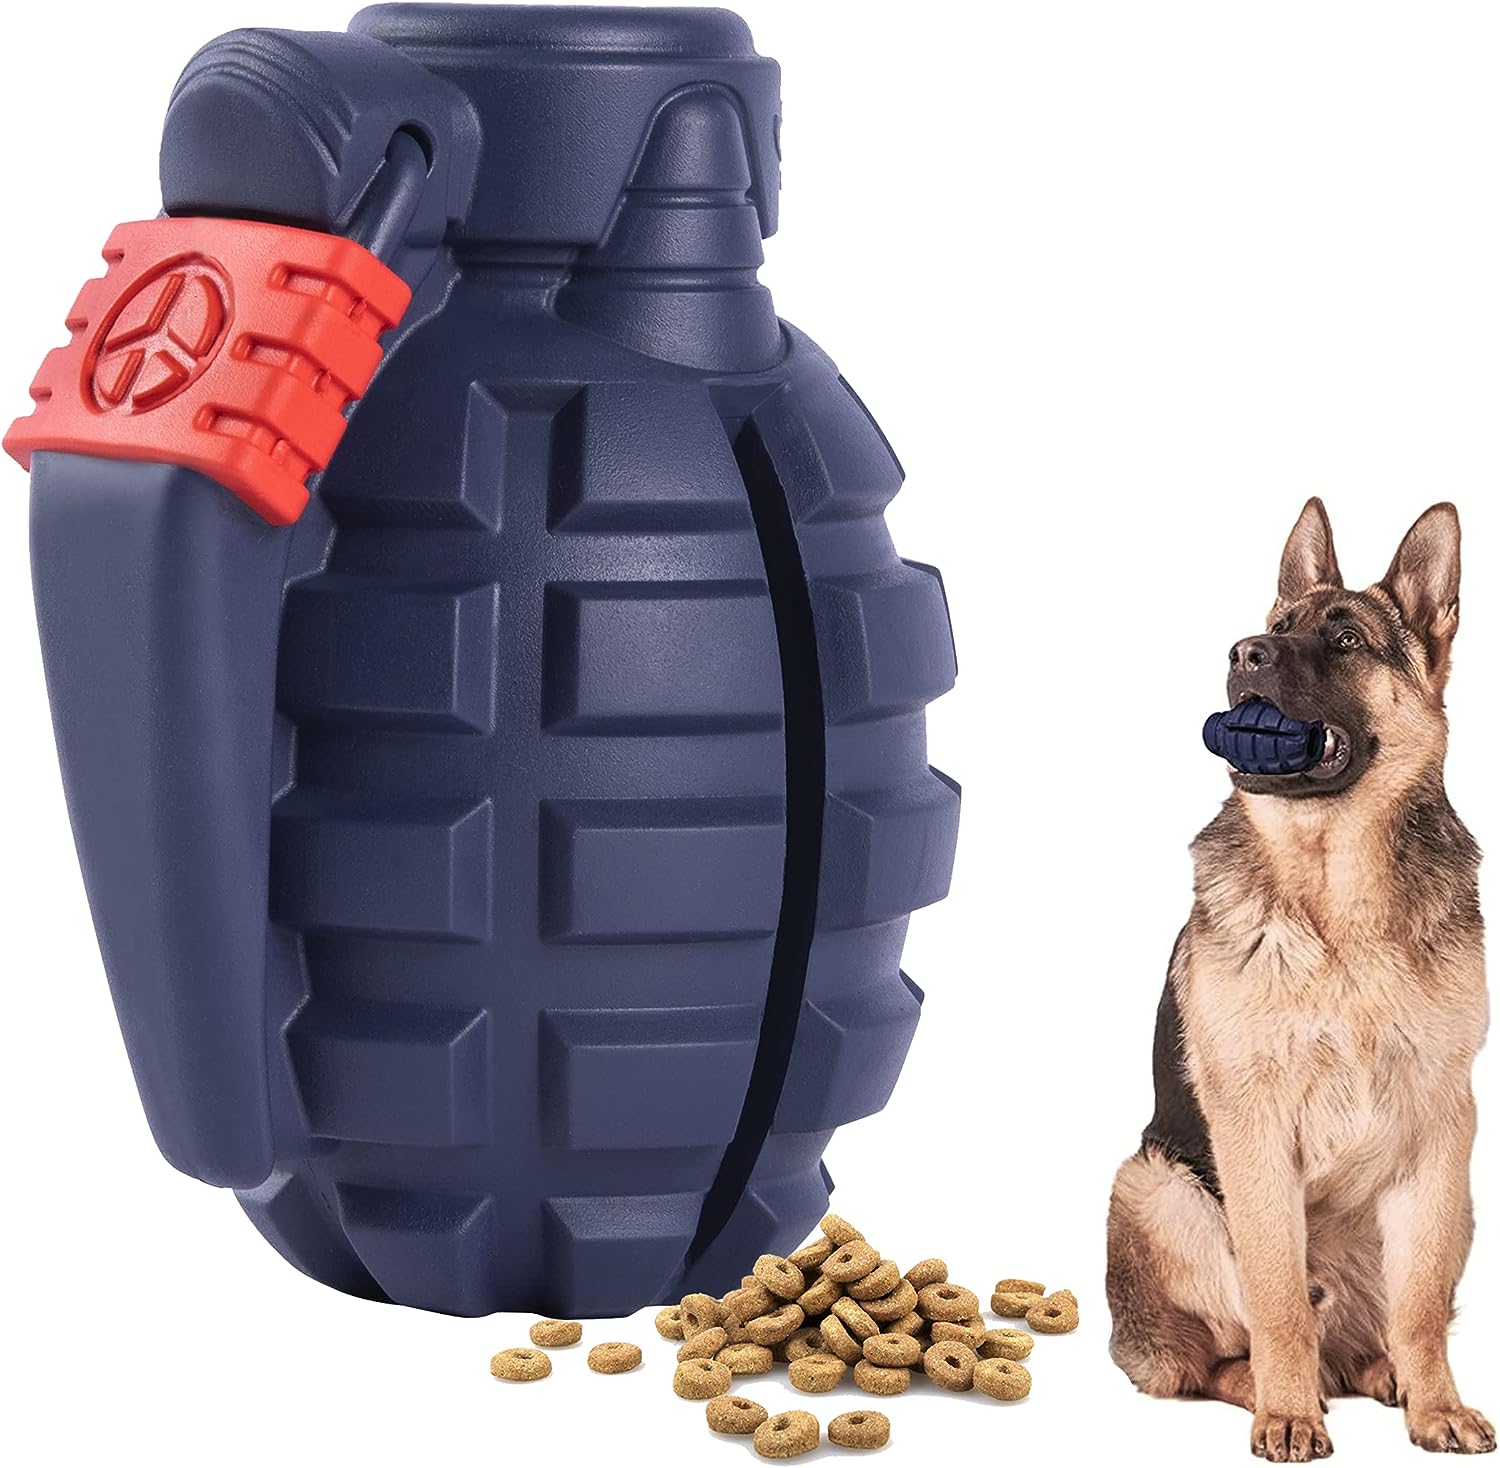 Indestructible Interactive Treat Toys for Large Medium Small Dogs